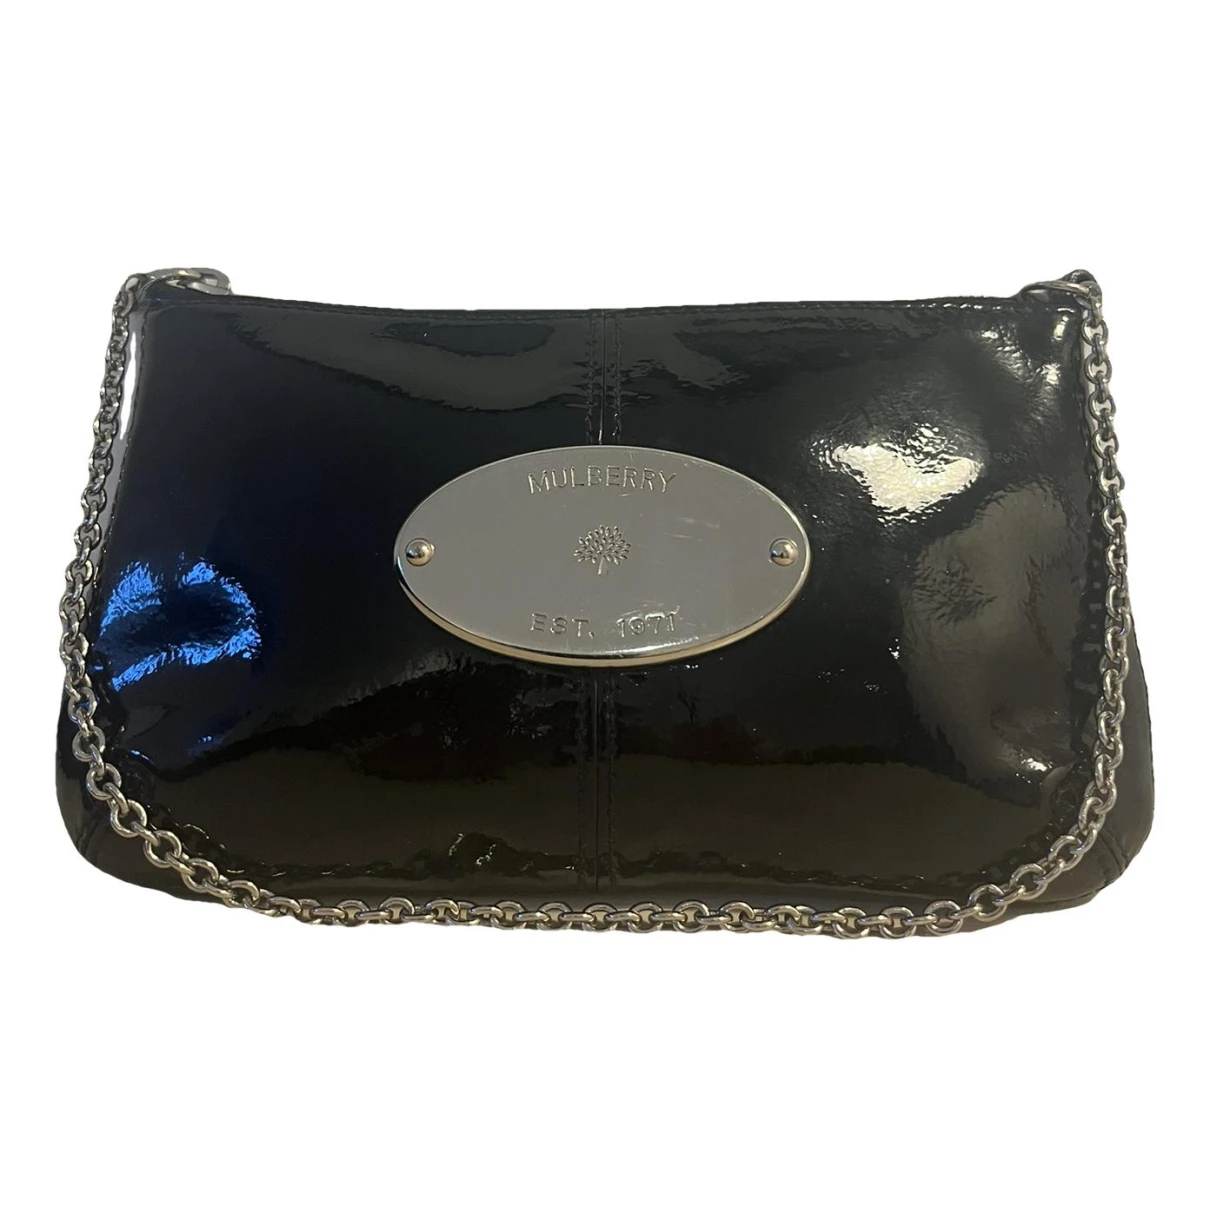 bags Mulberry clutch bags for Female Patent leather. Used condition